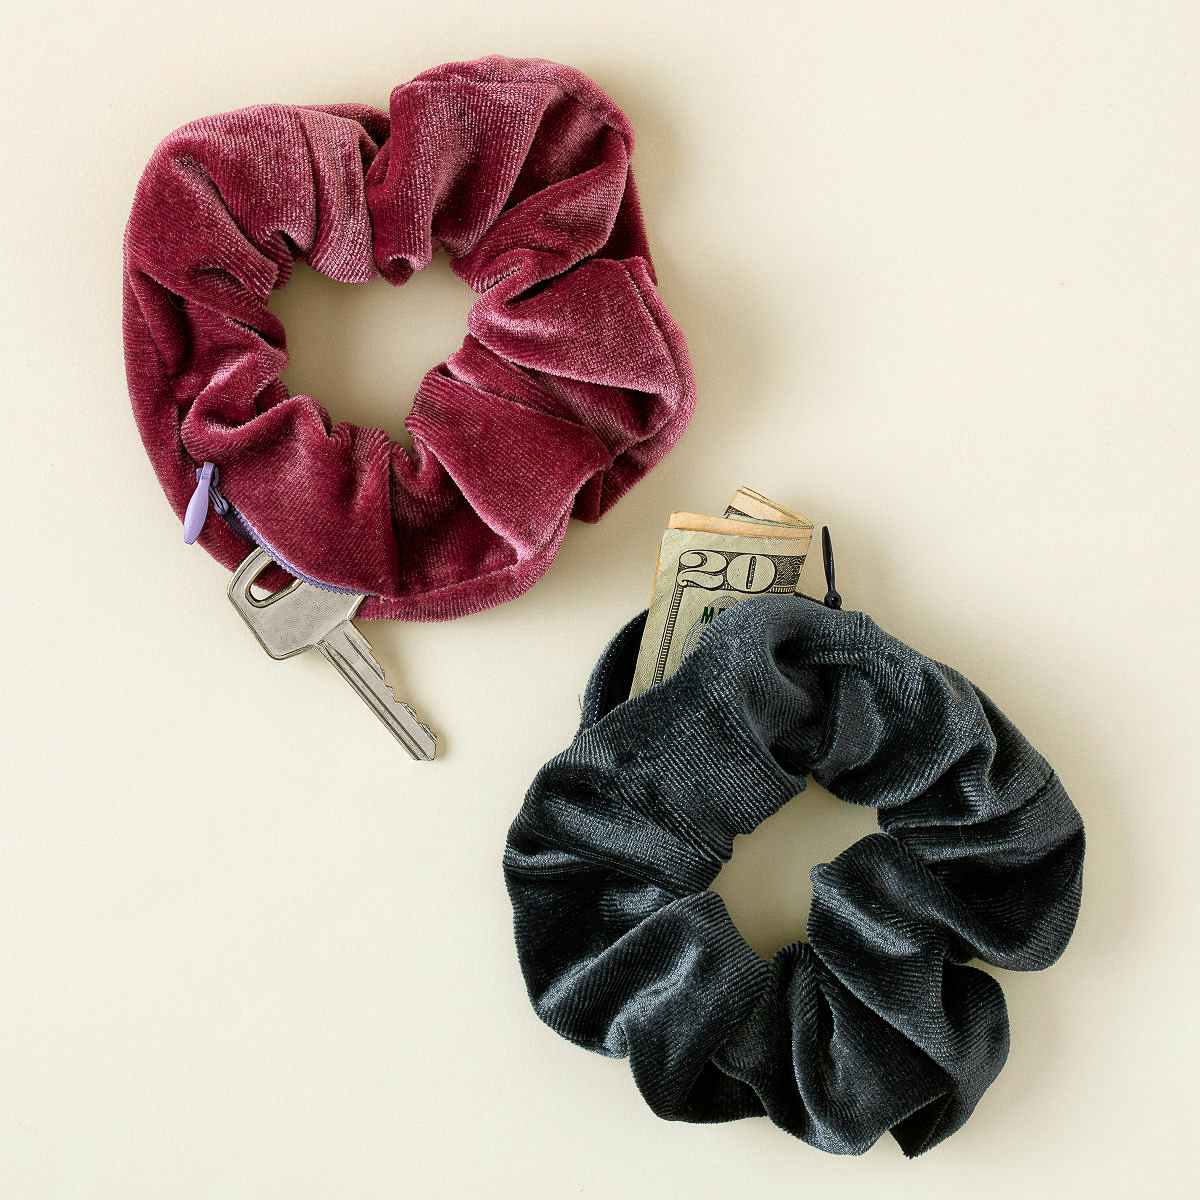 gifts for teens - Two scrunchies with pockets, hidden items peeking out from the pocket